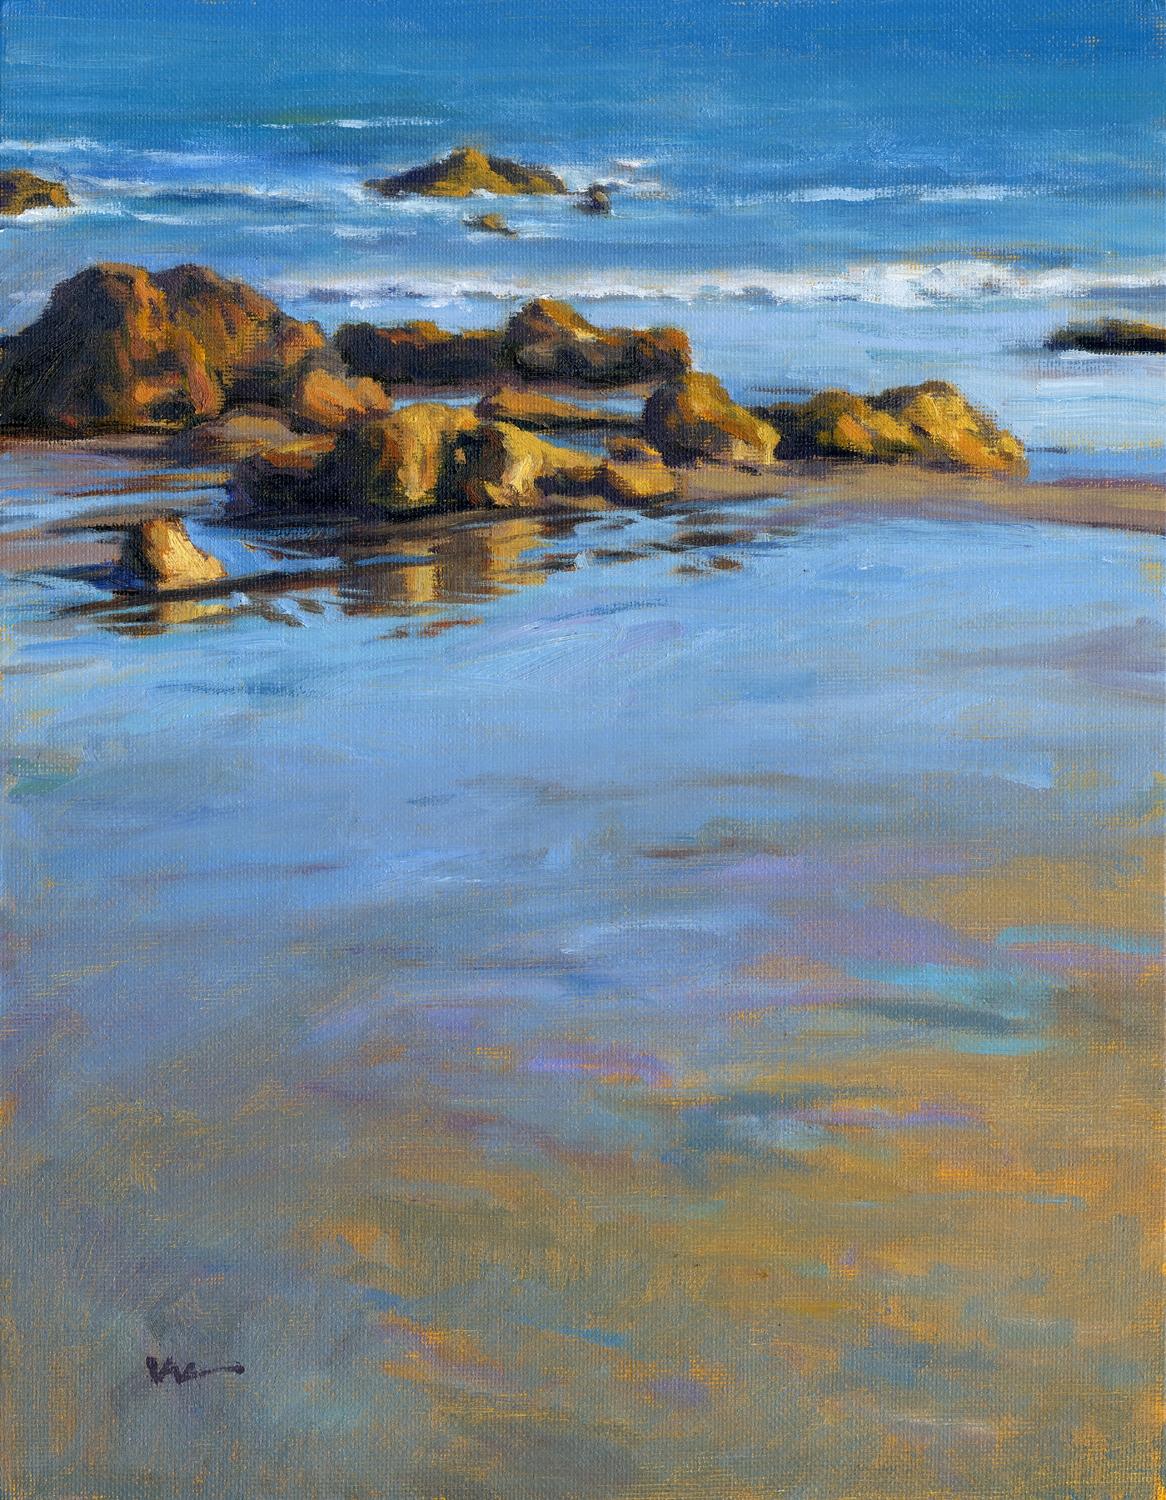 original oil on canvas panel  11 x 14 in / 27.94 x 35.56 cm     Beautiful reflections of the rocks at El Matador (near Malibu), California...    This painting was based on studies I painted on location and photographs I captured on a memorable